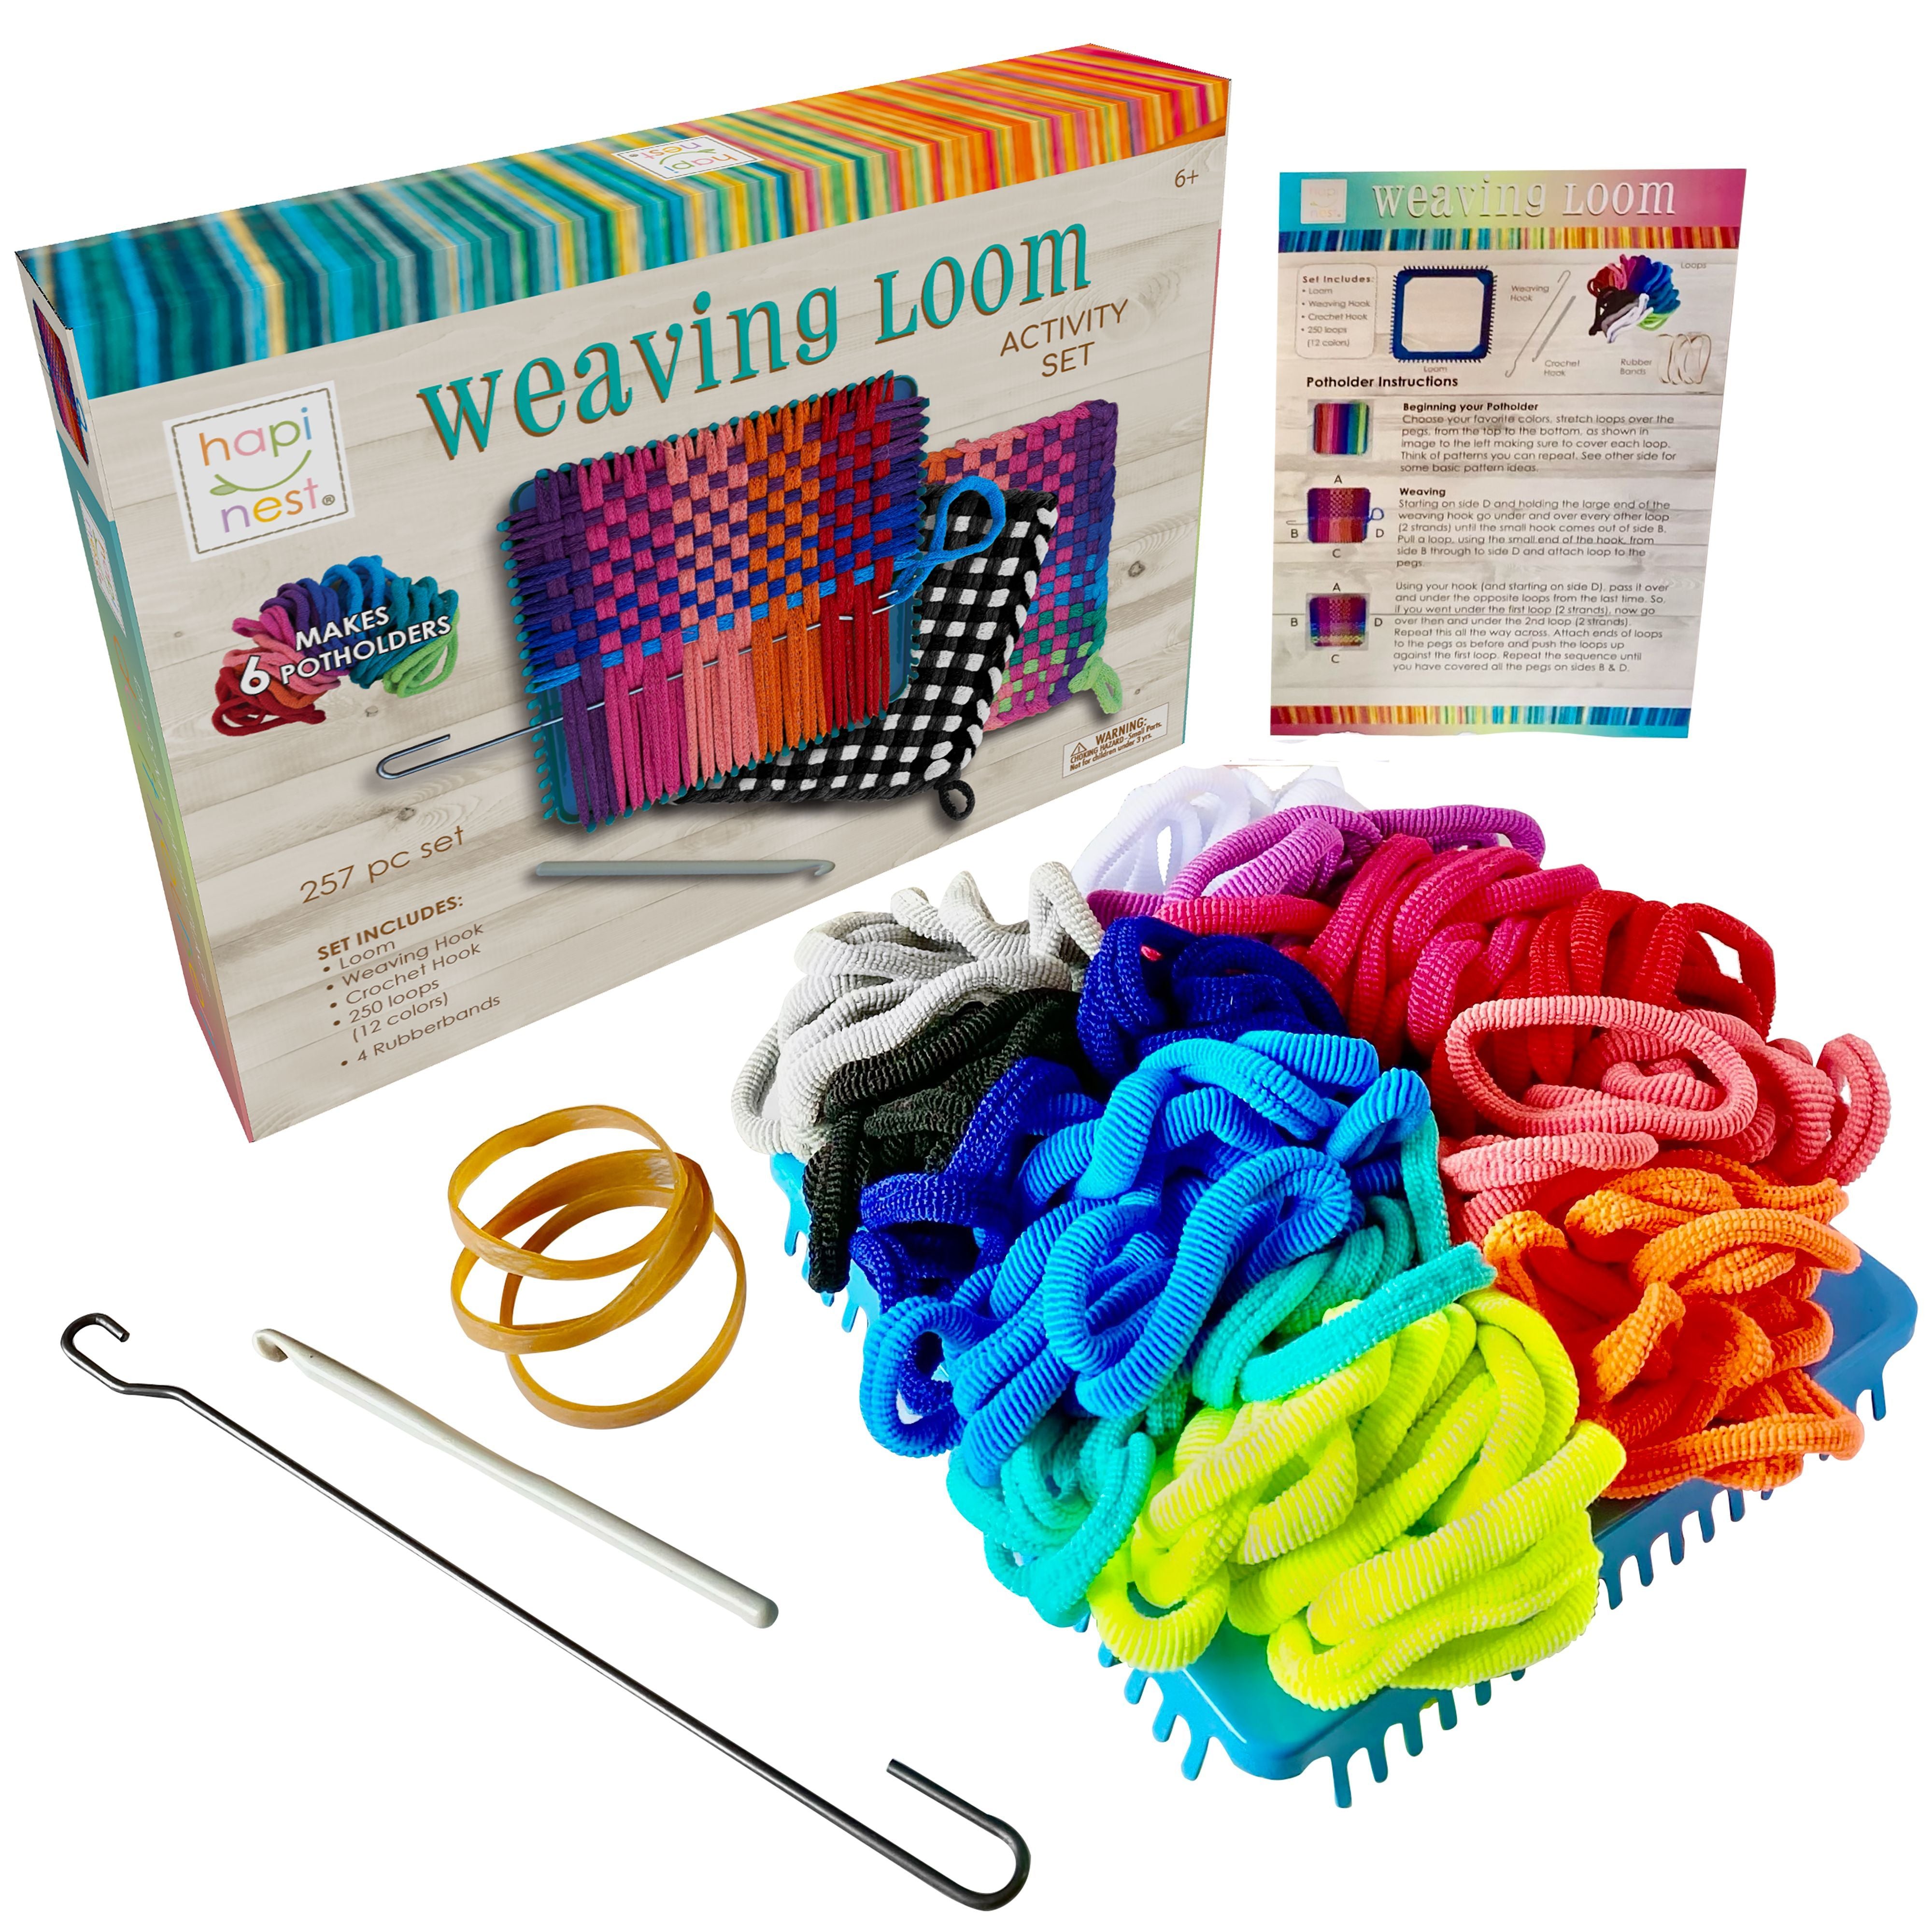 How to Use the Made By Me Weaving Loom to Weave a Potholder 